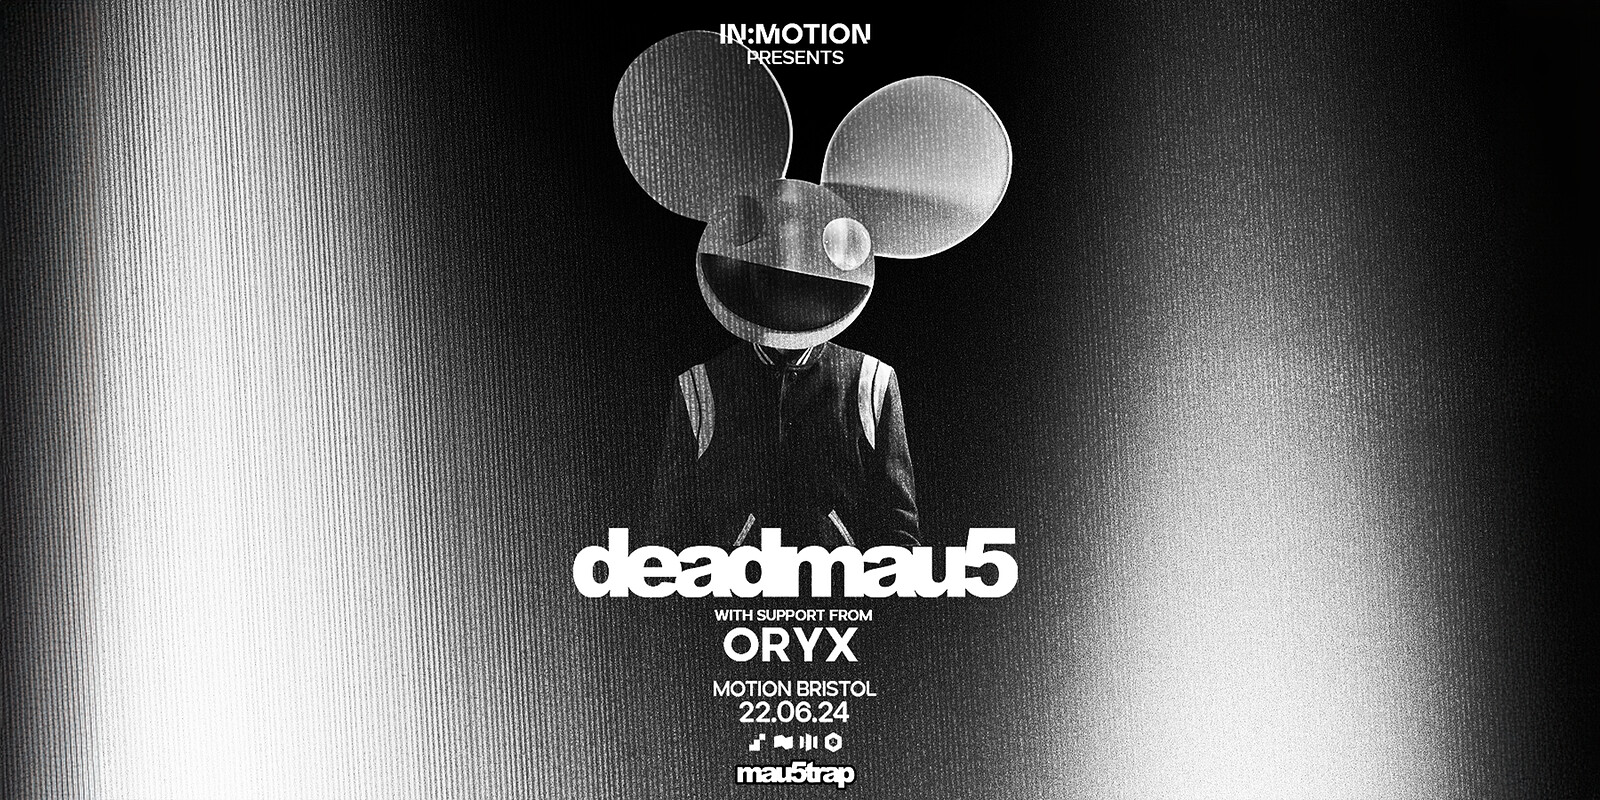 In:Motion Presents: deadmau5 at Motion